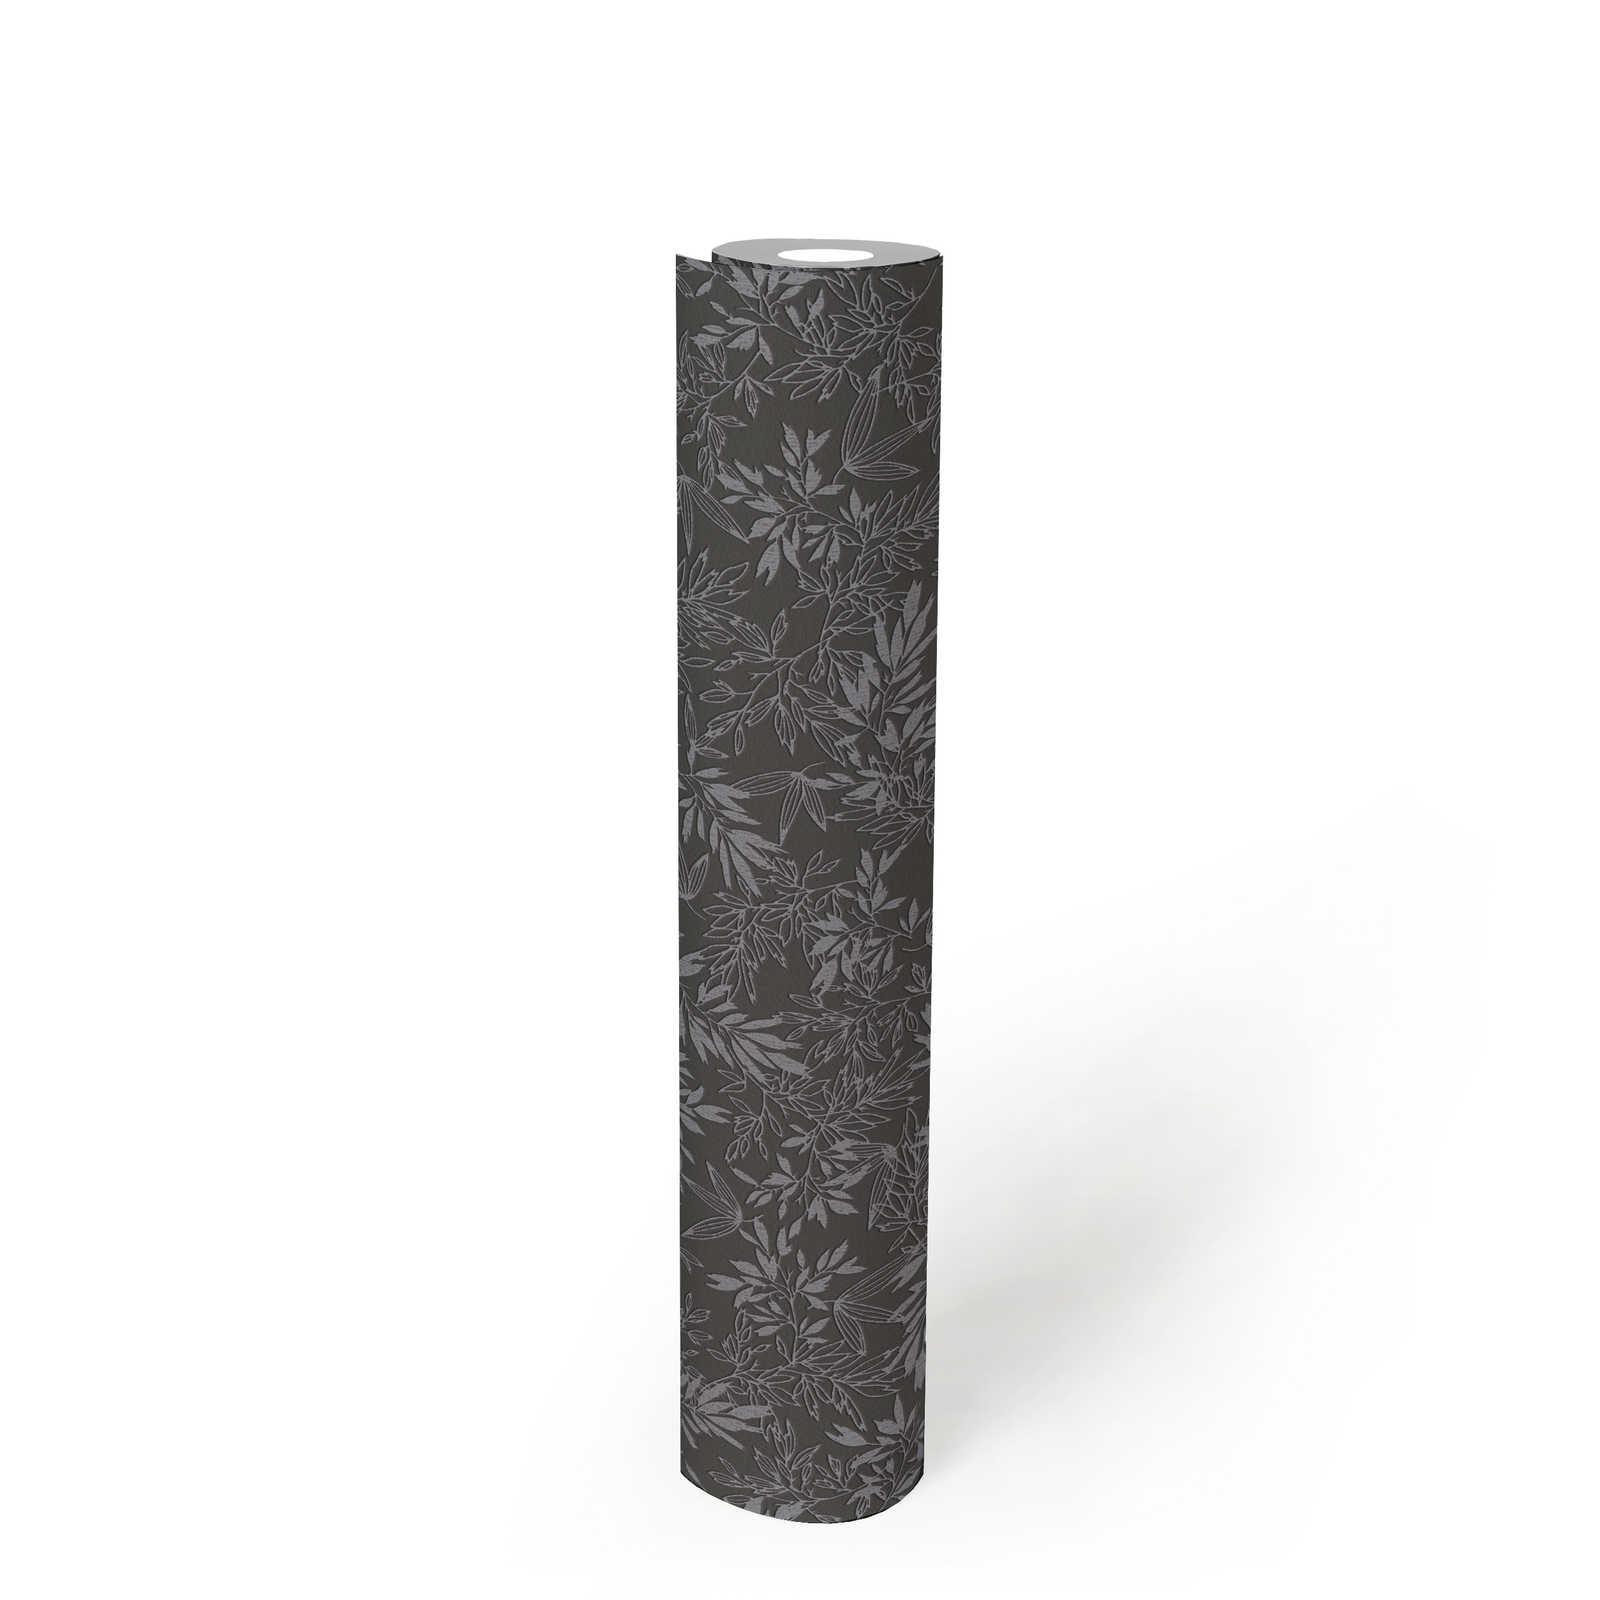             Wallpaper with leaves motif and foam structure - black, grey
        